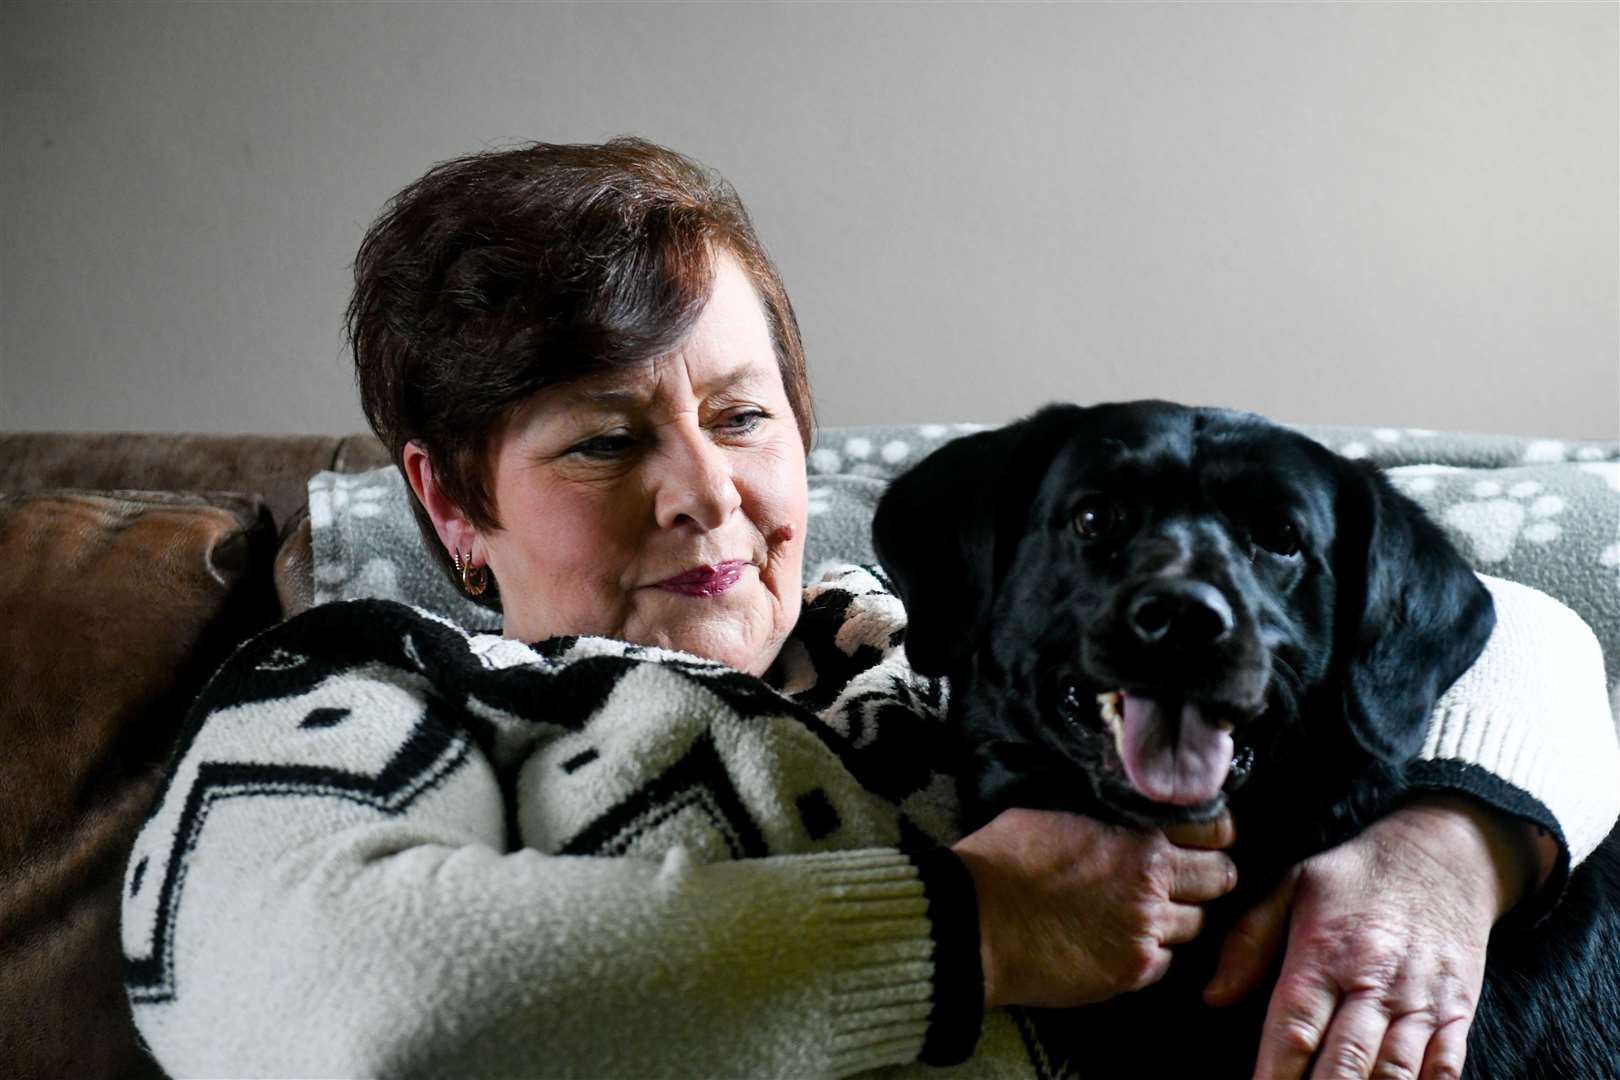 Ms Villas, who lives with her dog and cat, was concerned for her pets' health and safety. Picture: James MacKenzie